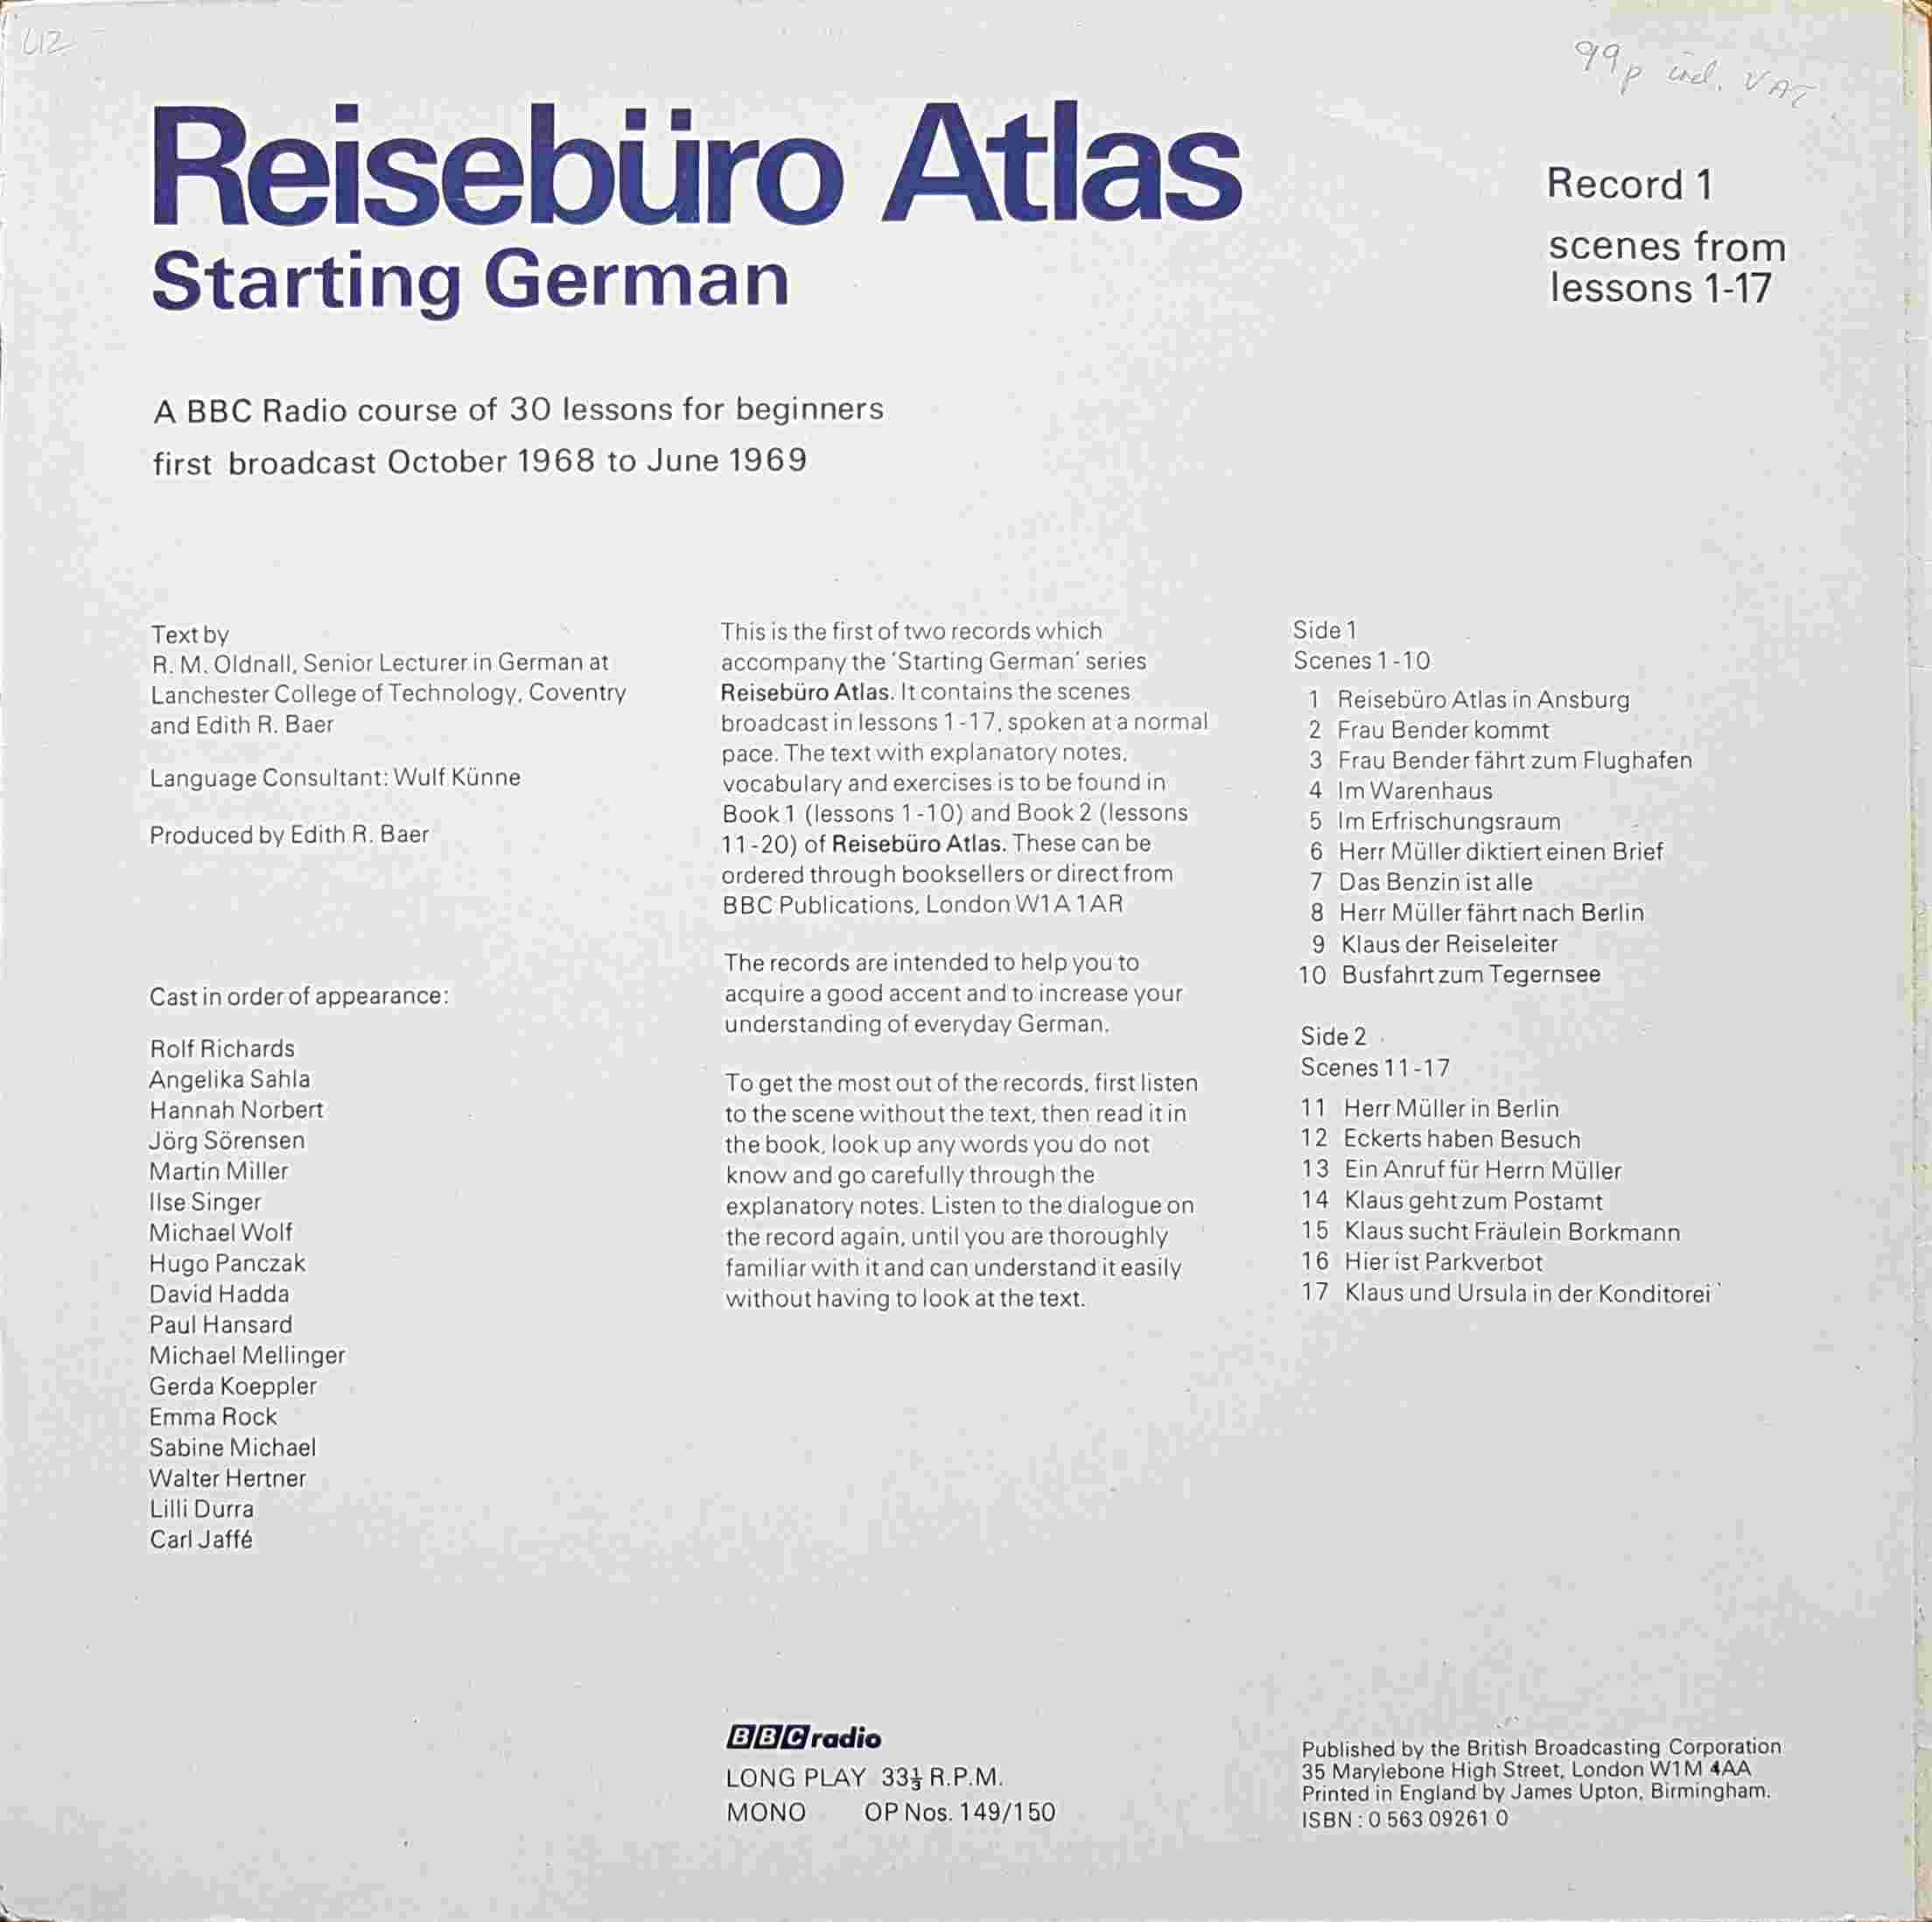 Picture of OP 149/150 Reiseburo Atlas - Starting German - A BBC Radio course of 30 lessons for beginners - Record 1 - Lessons 1 - 17 by artist R. M. Oldnall / Wulf Kunne from the BBC records and Tapes library